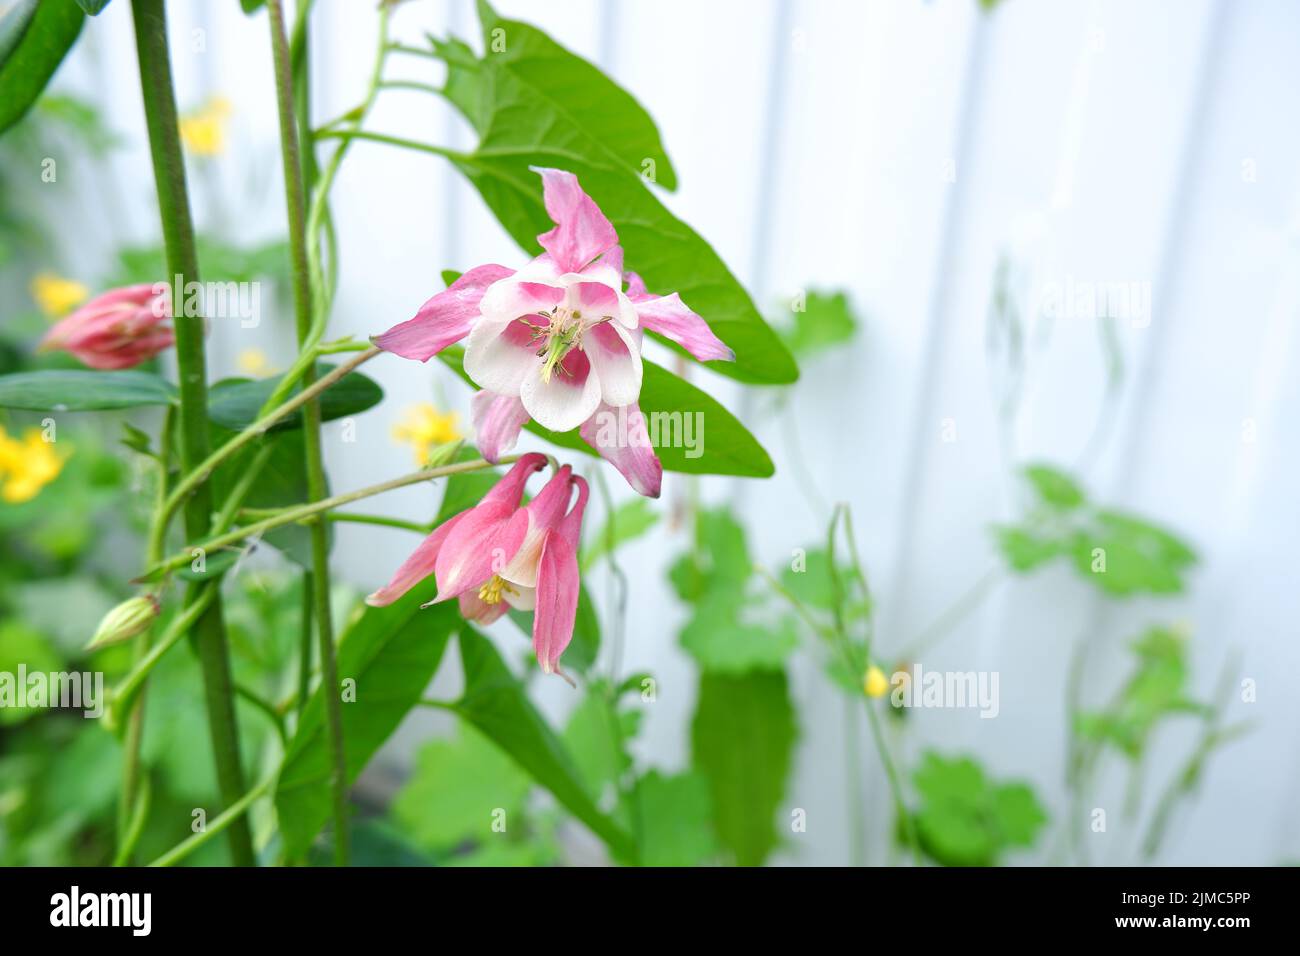 Pink flowers. Aquilegia, columbine flowers with pink, white petals. Stock Photo